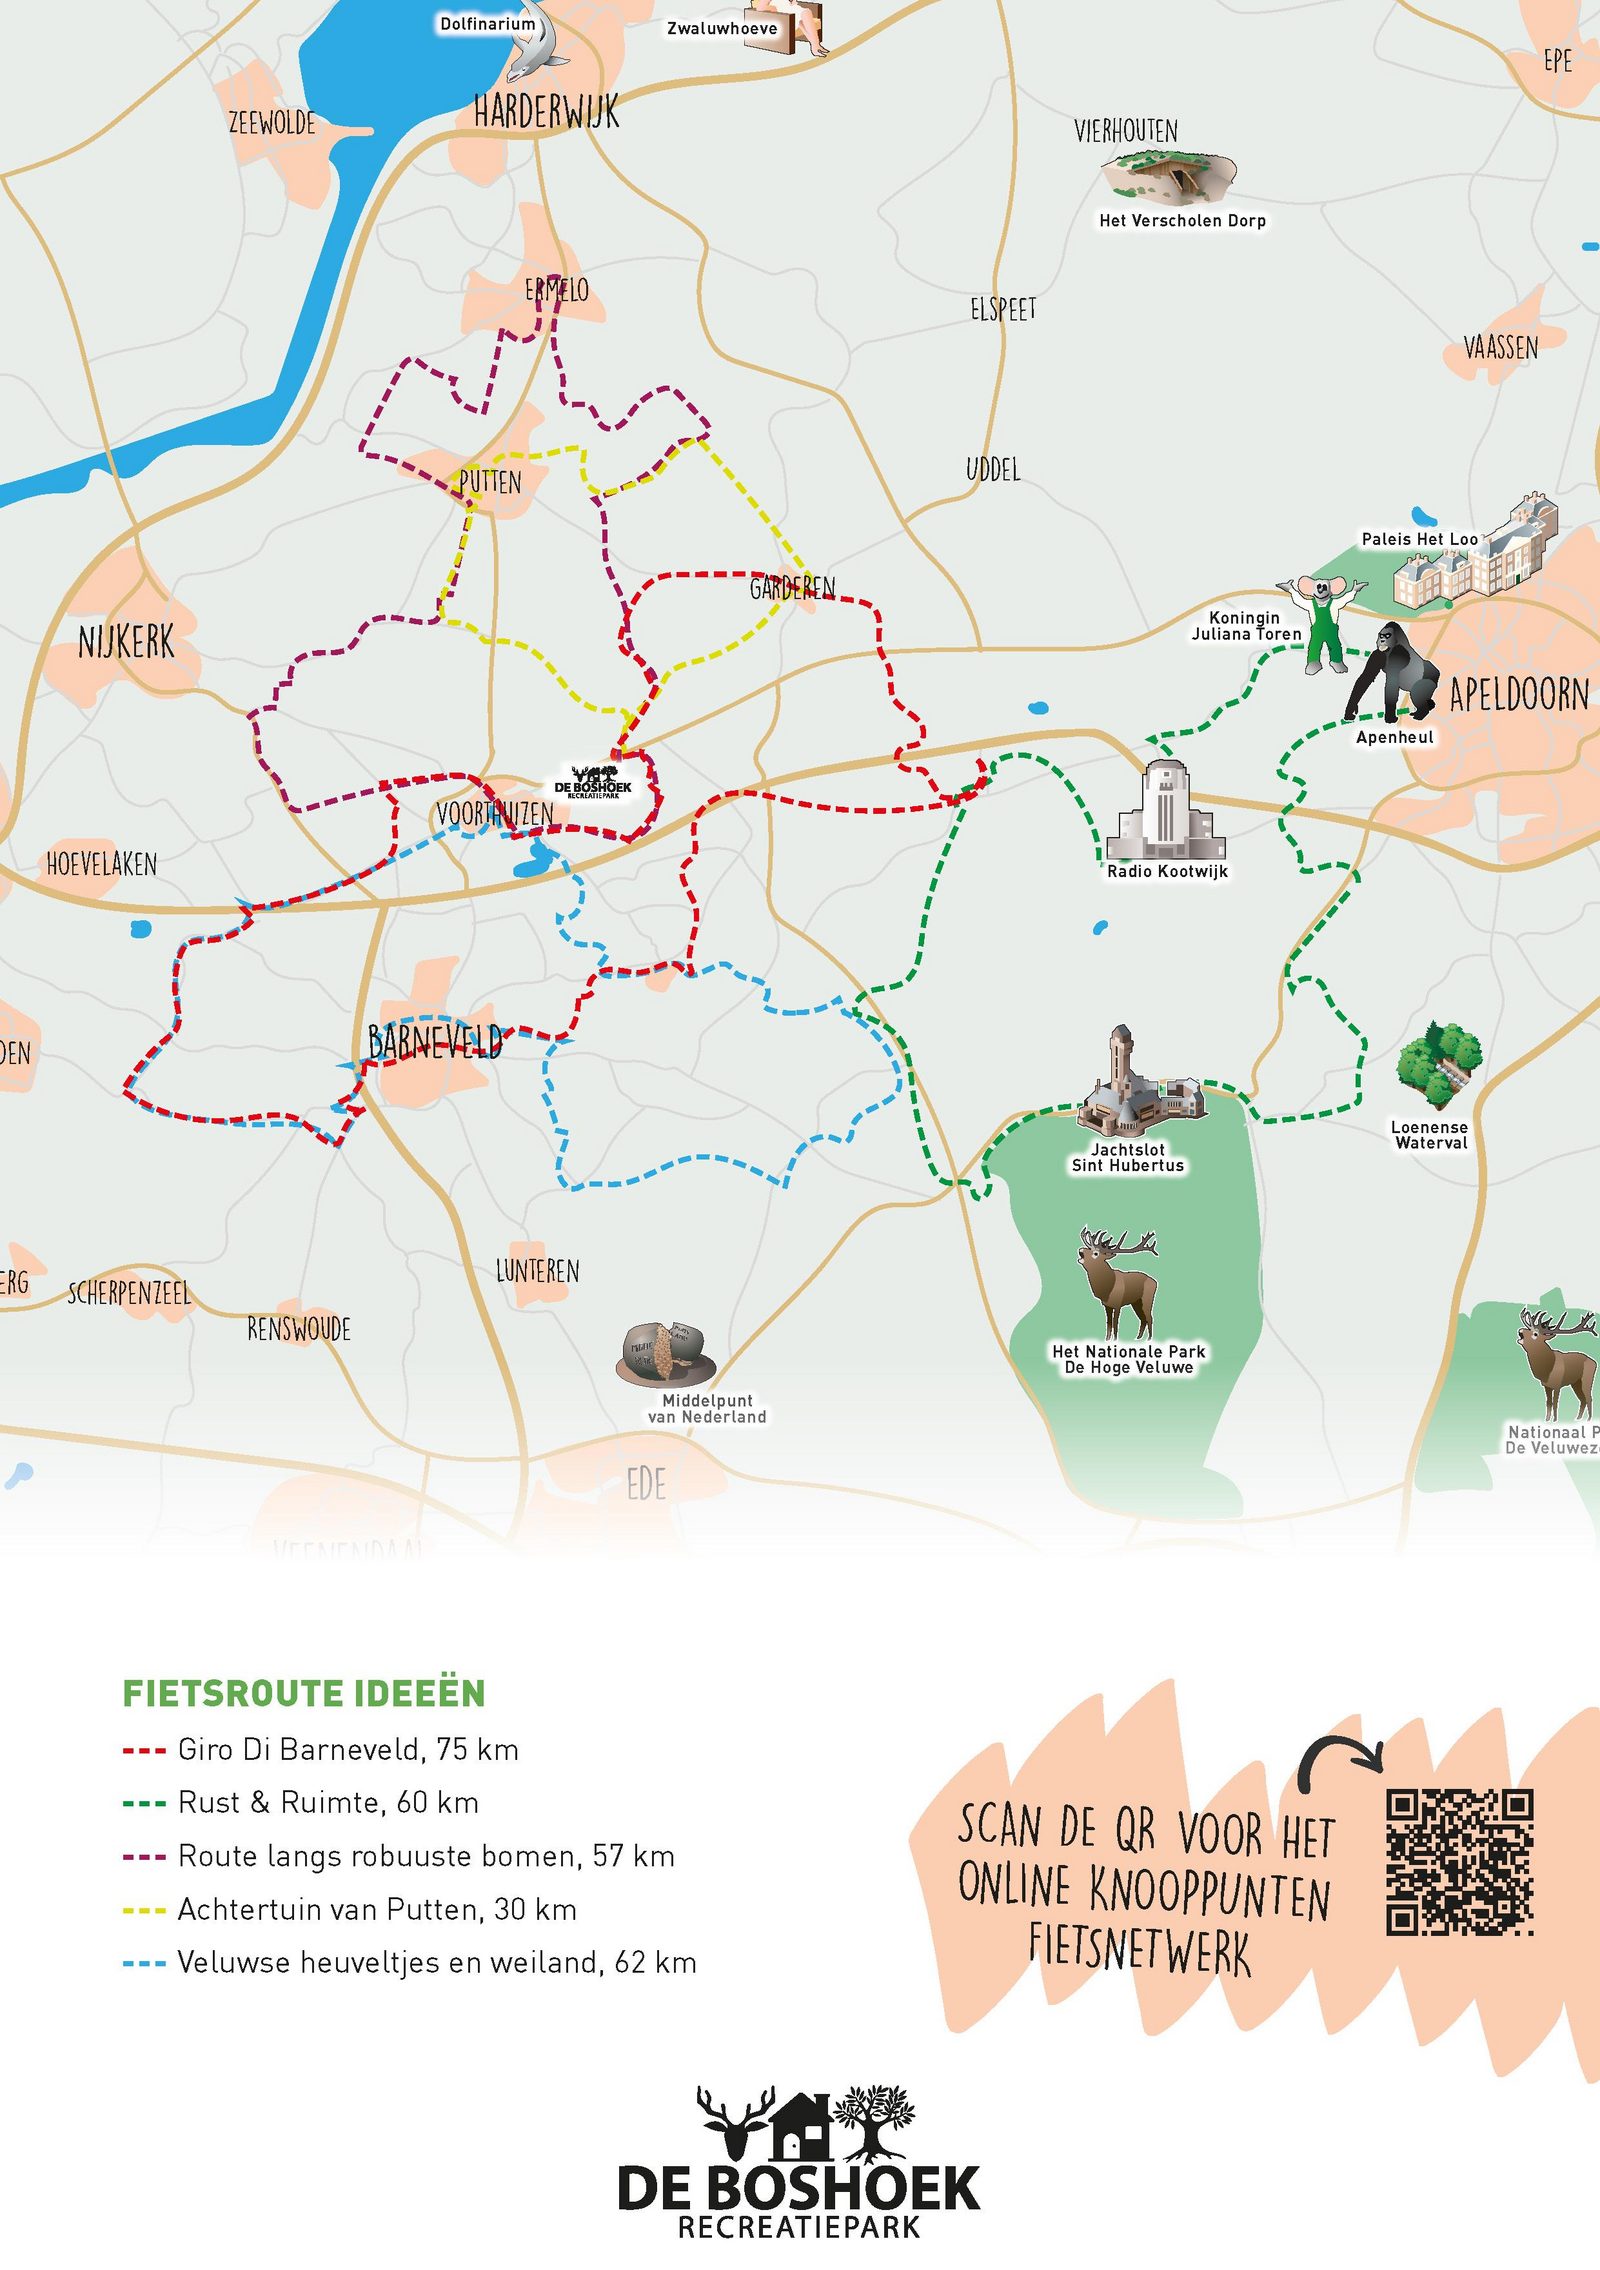 Cycling routes